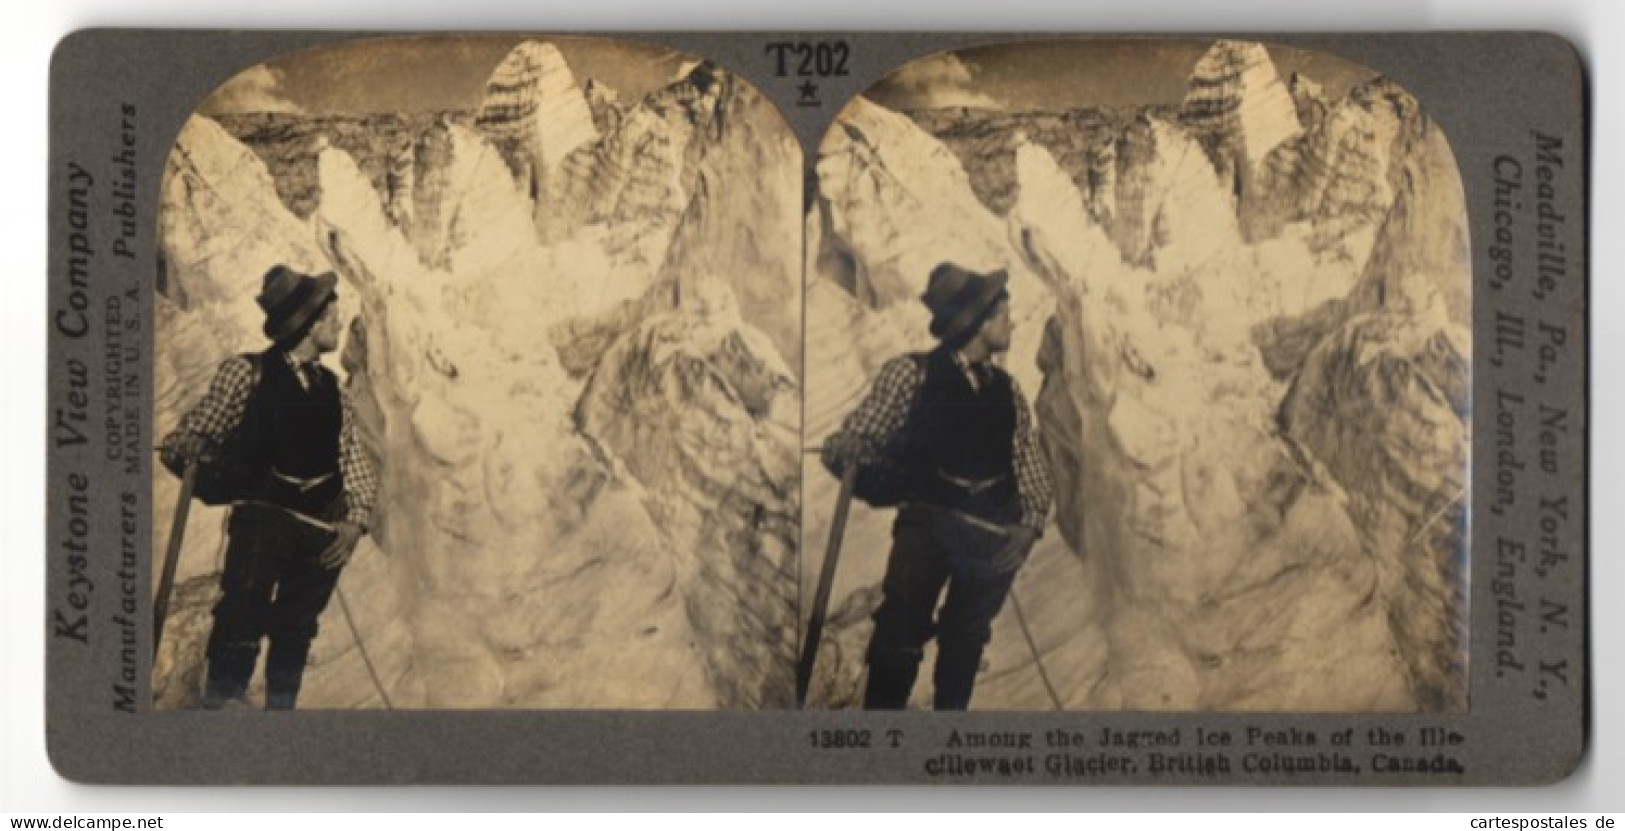 Stereo-Fotografie Keystone View Co., Meadville, Ansicht British Columbia, Jagged Ice Peaks Of The Illecillewaet Galcier  - Photos Stéréoscopiques